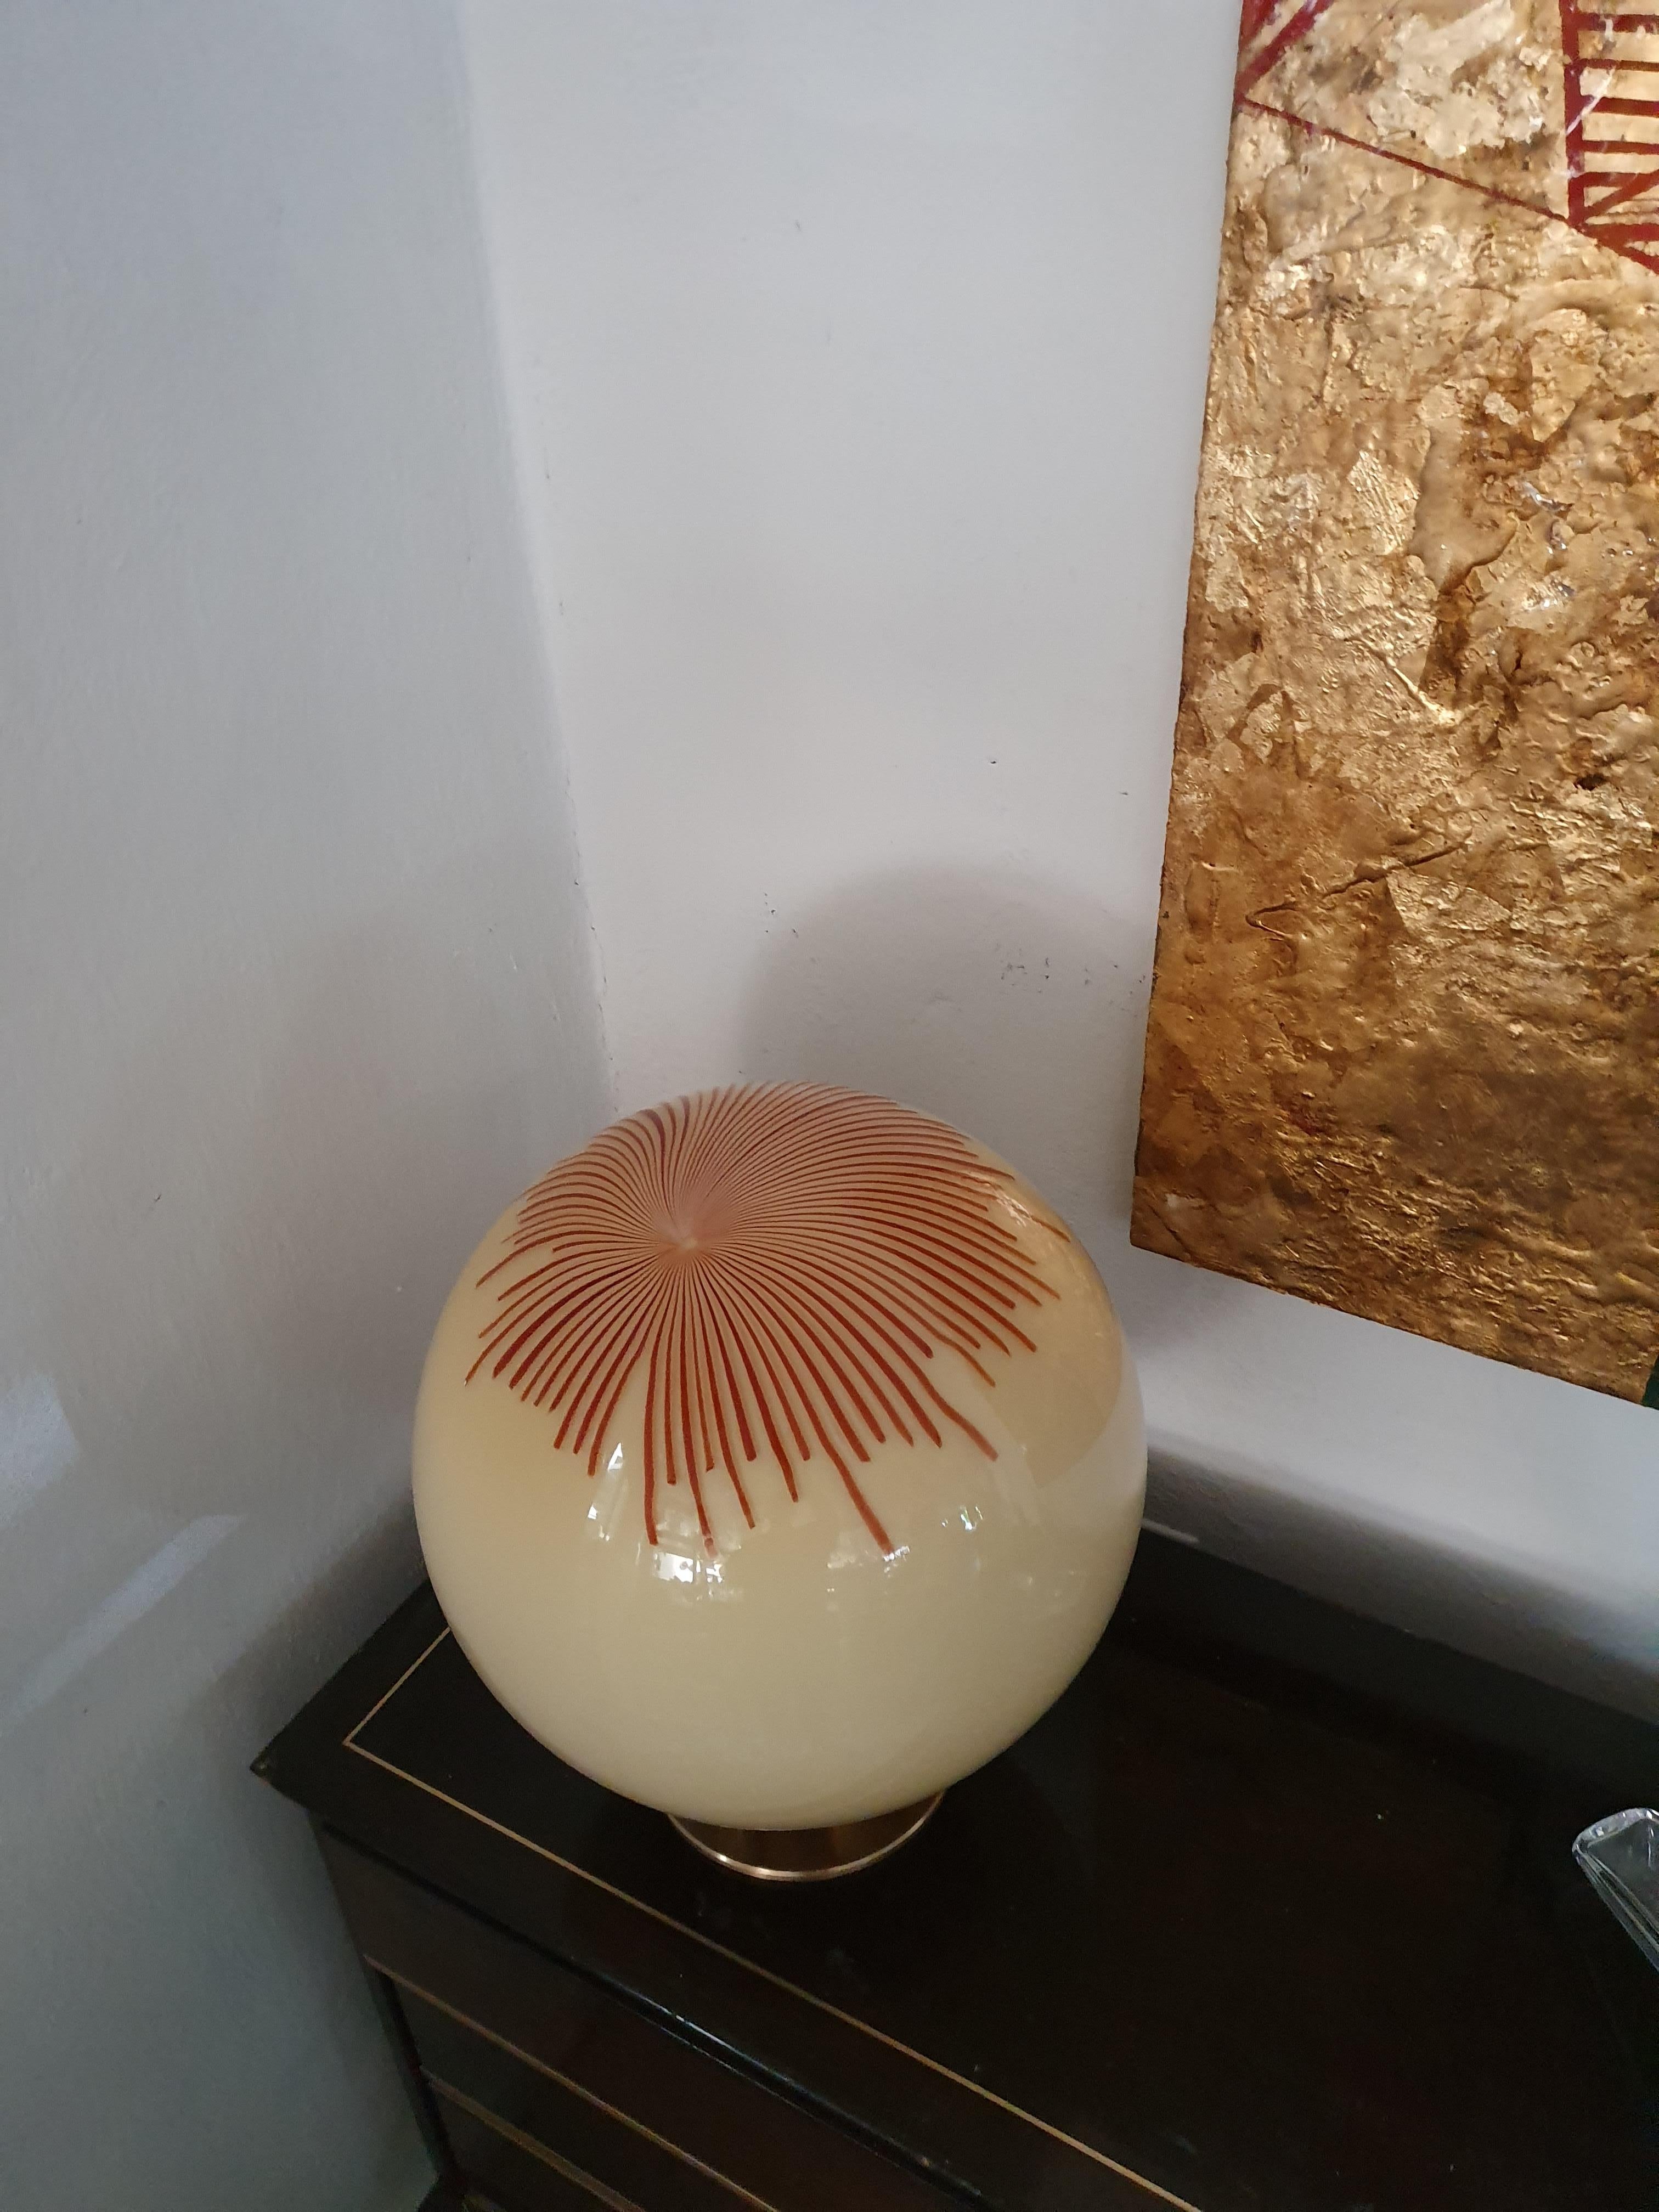 Mid-Century Modern table lamp with one light by La Murrina in Murano glass and brass hardware, this sphere is signed and the glass is attributed to Ludovico Diaz Santillana's 